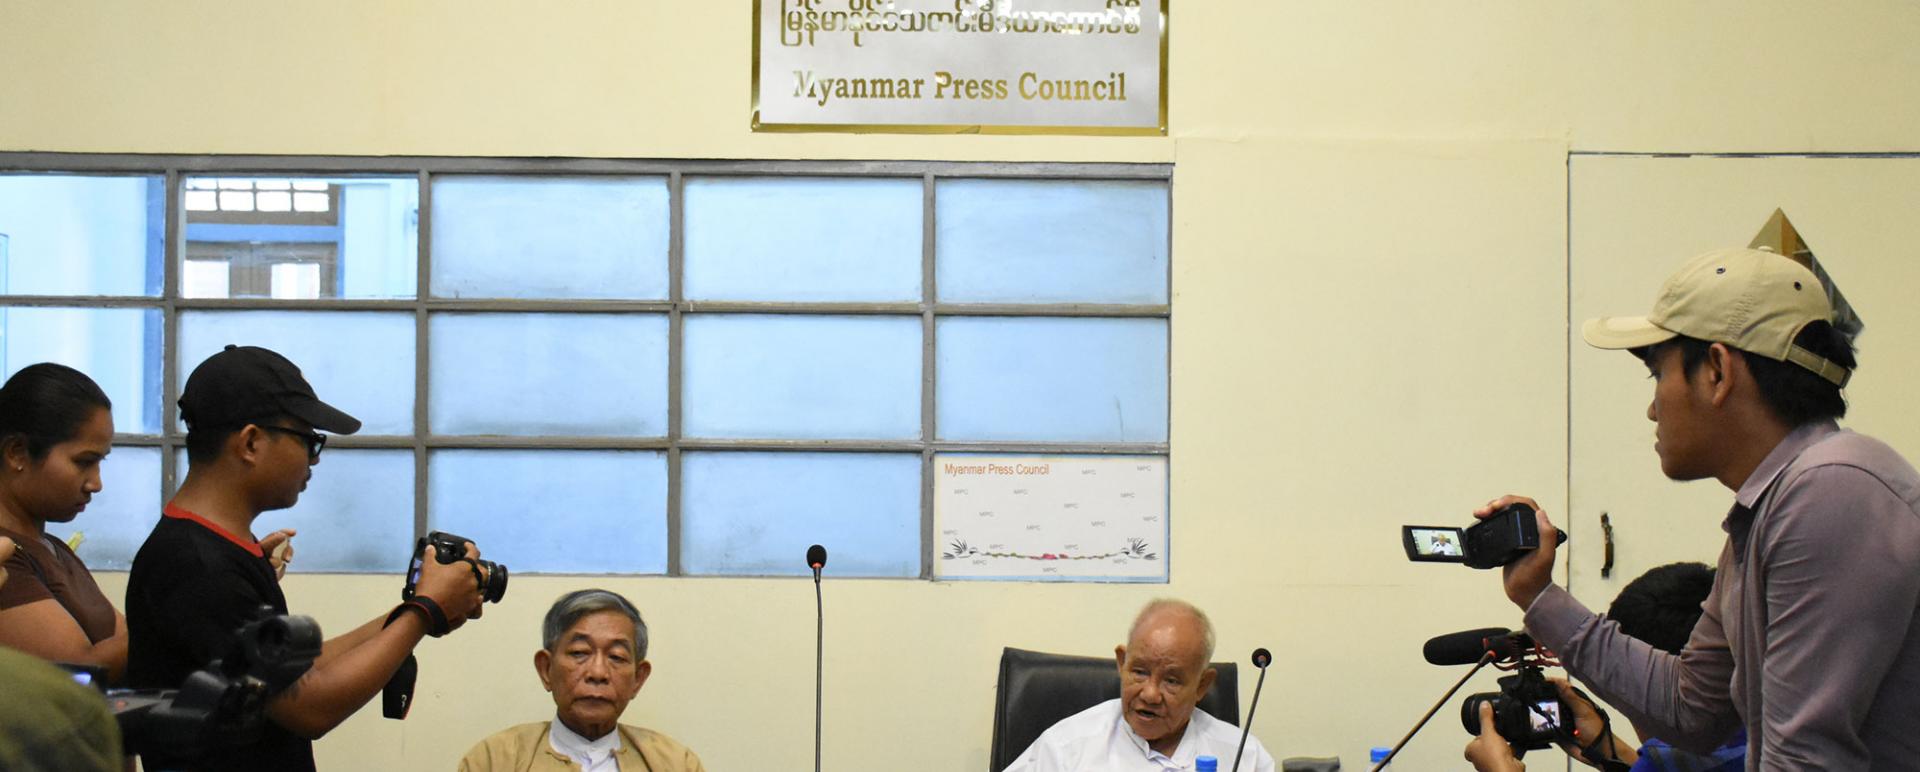 Myanmar Press Council officials reply to media questions (Photo-Kyi Naing)